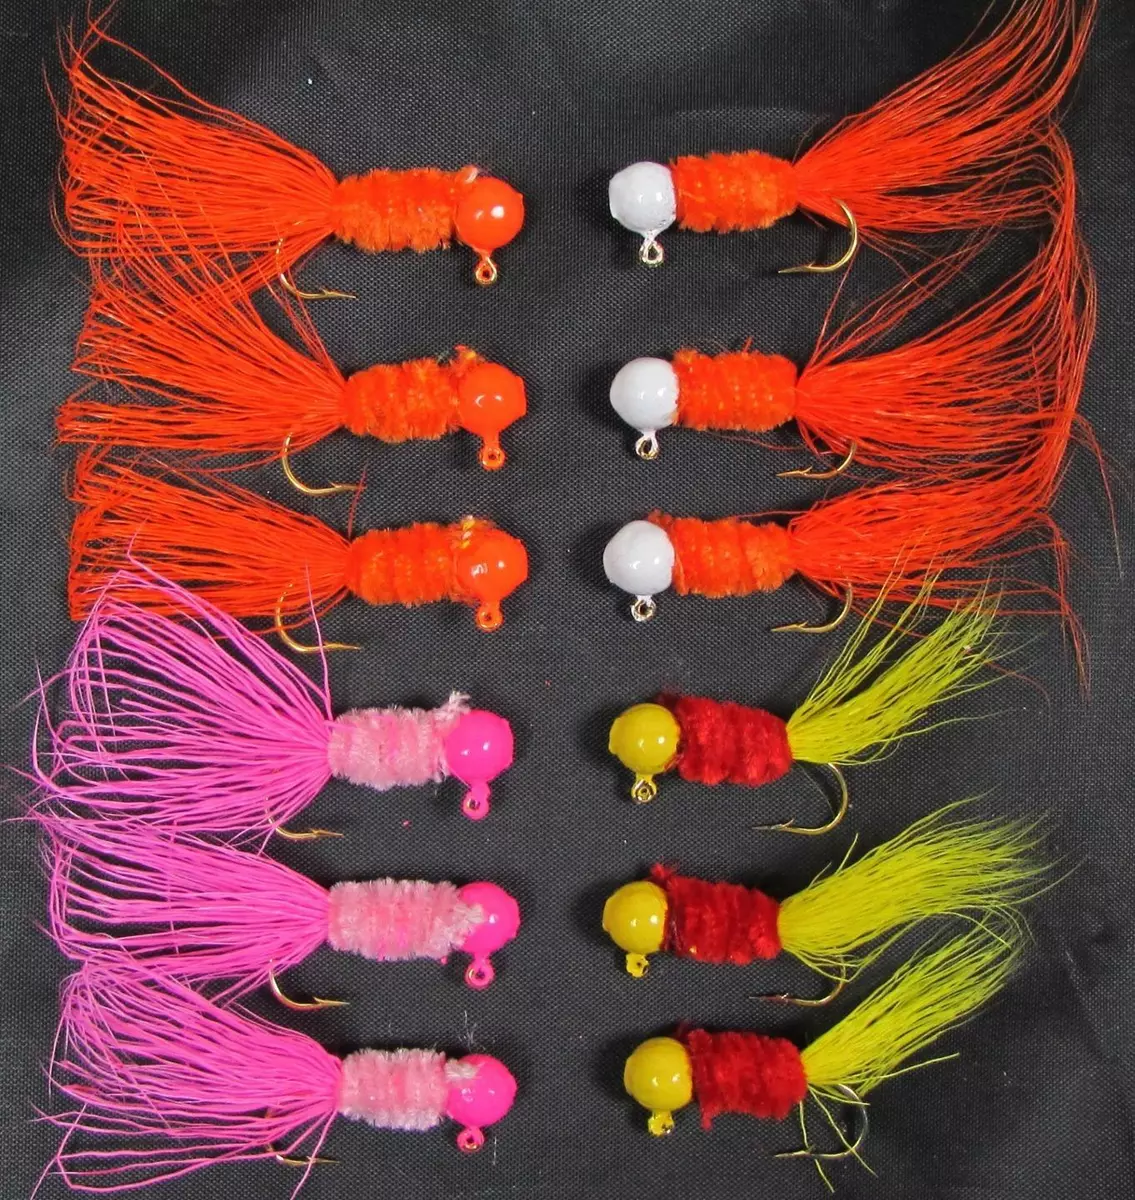 12 Grandpa's Crappie Jig 1/16oz Mustad Hook #6 Deer Belly Hair Tail  PAPERMOUTHS!